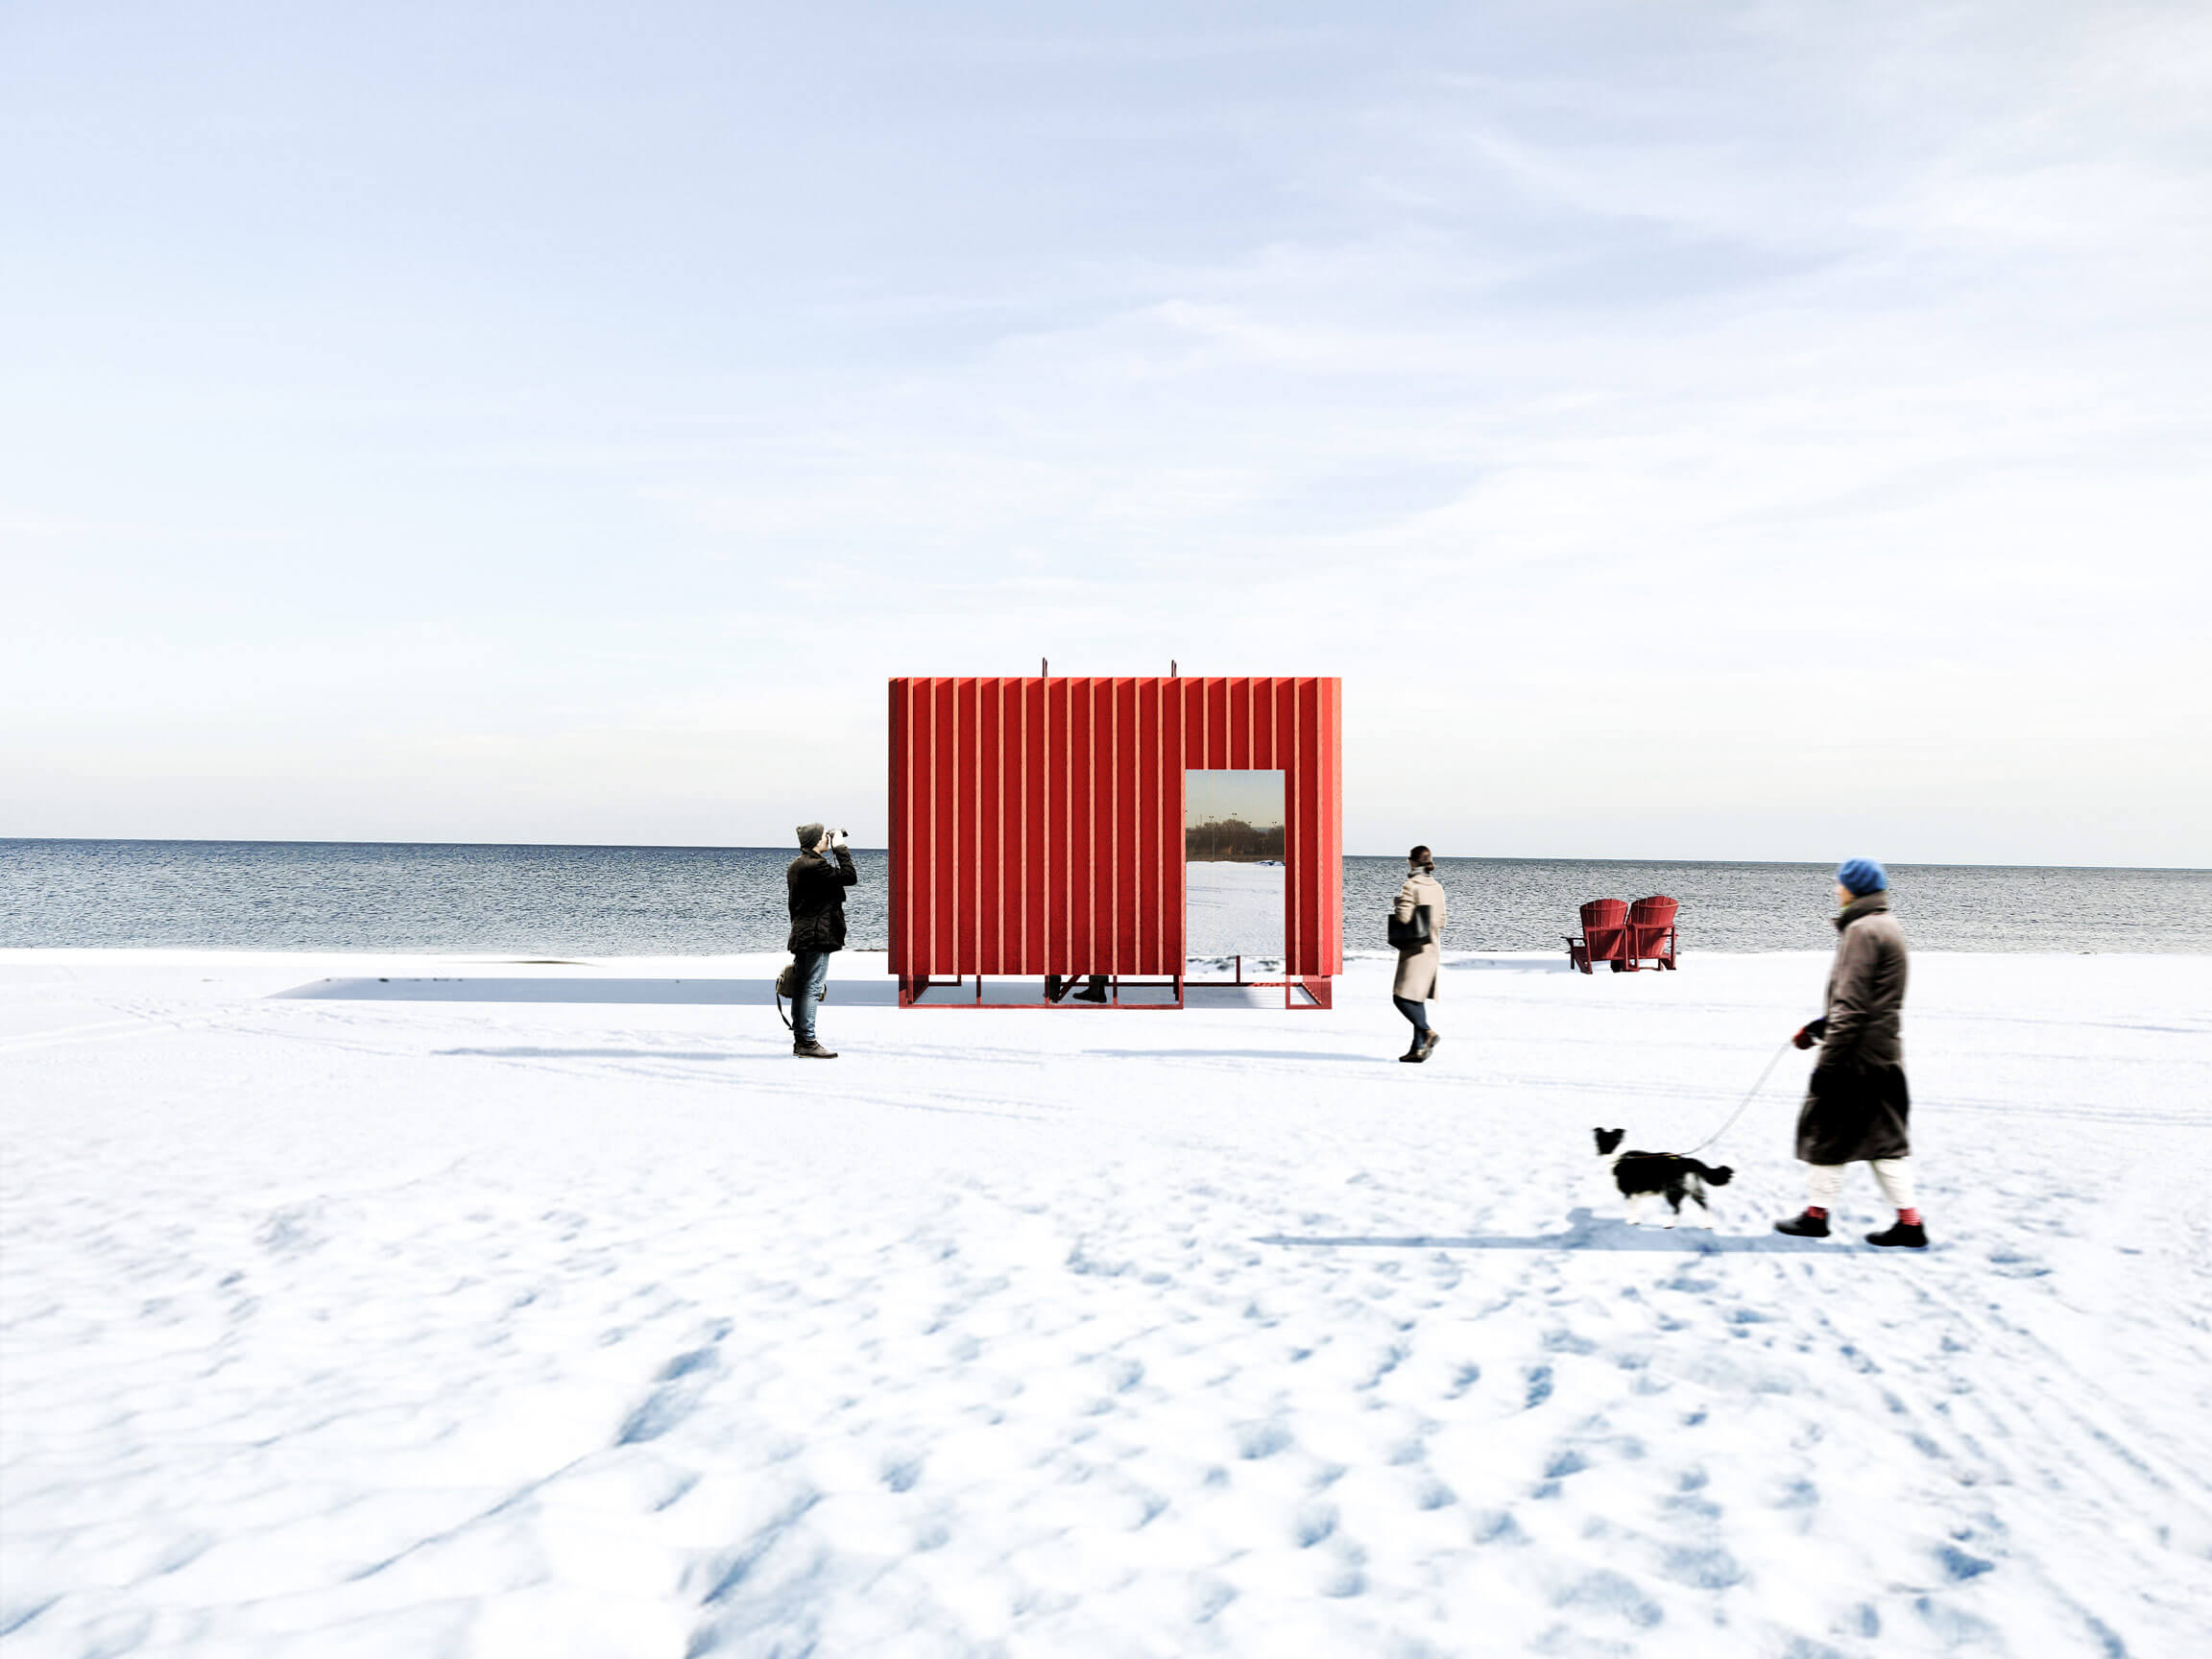 a simple red cube structure on a snowy beach